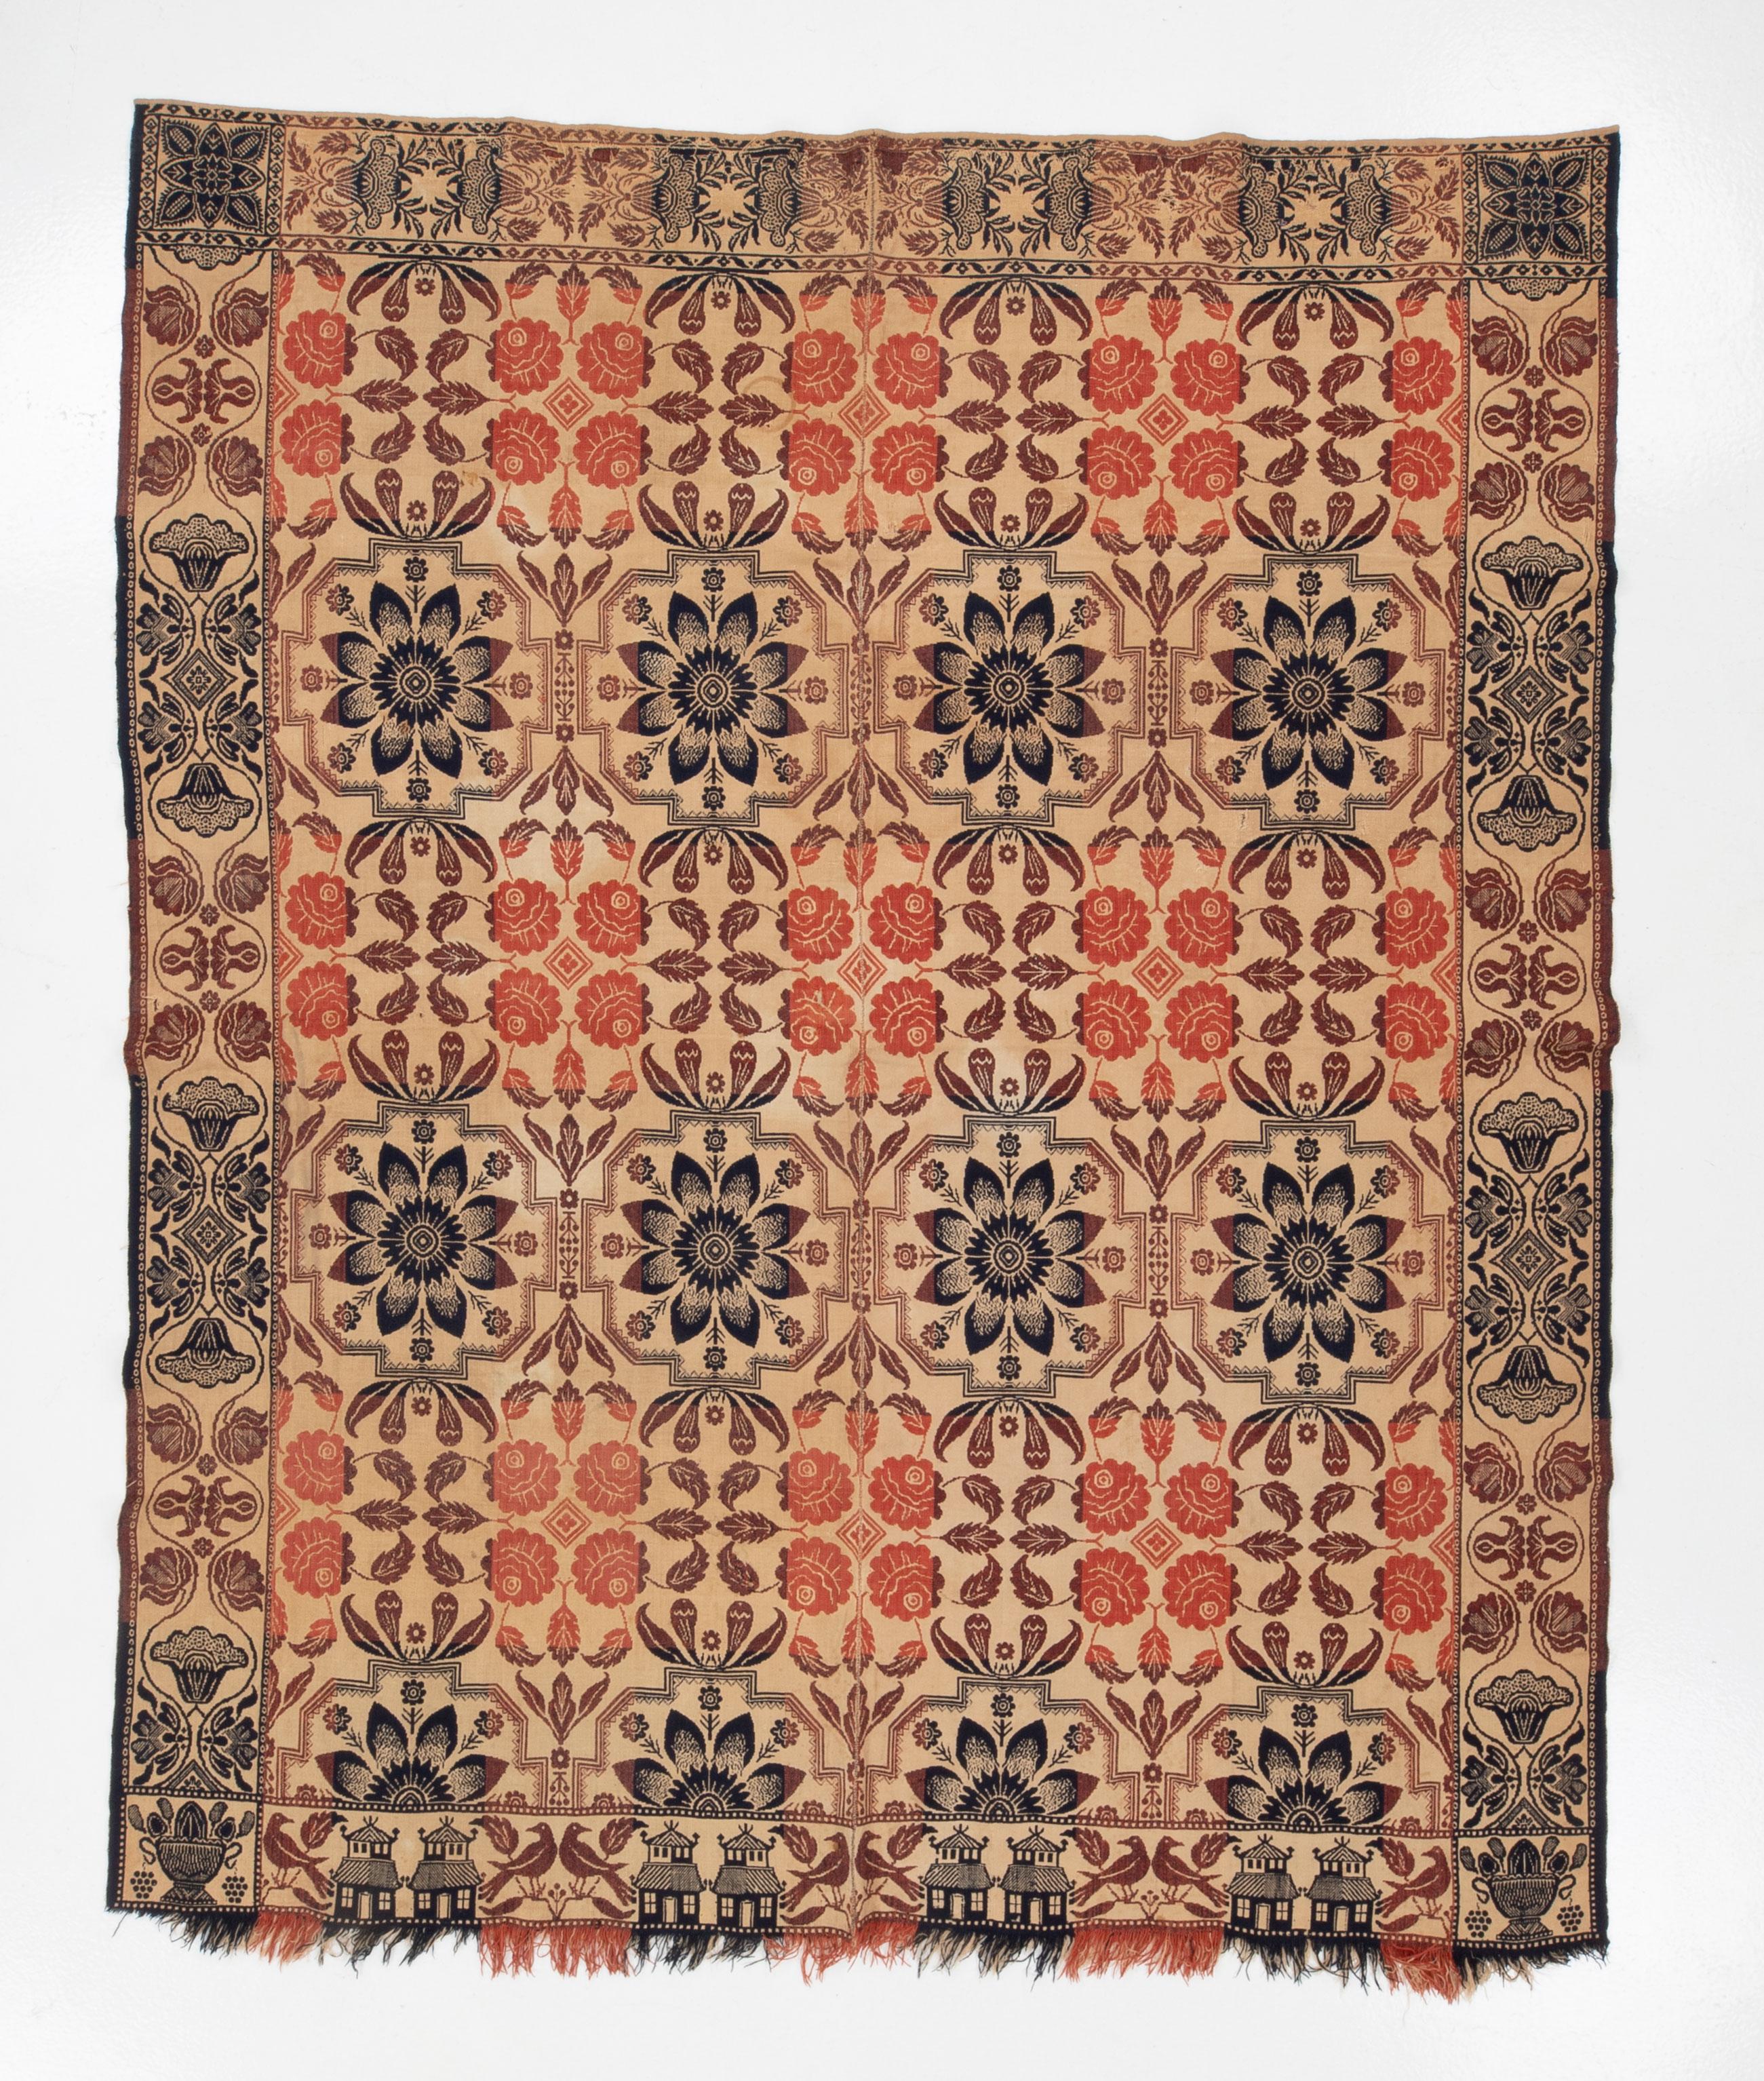 American Craftsman Jaquard Woven American Coverlet 19th C. For Sale